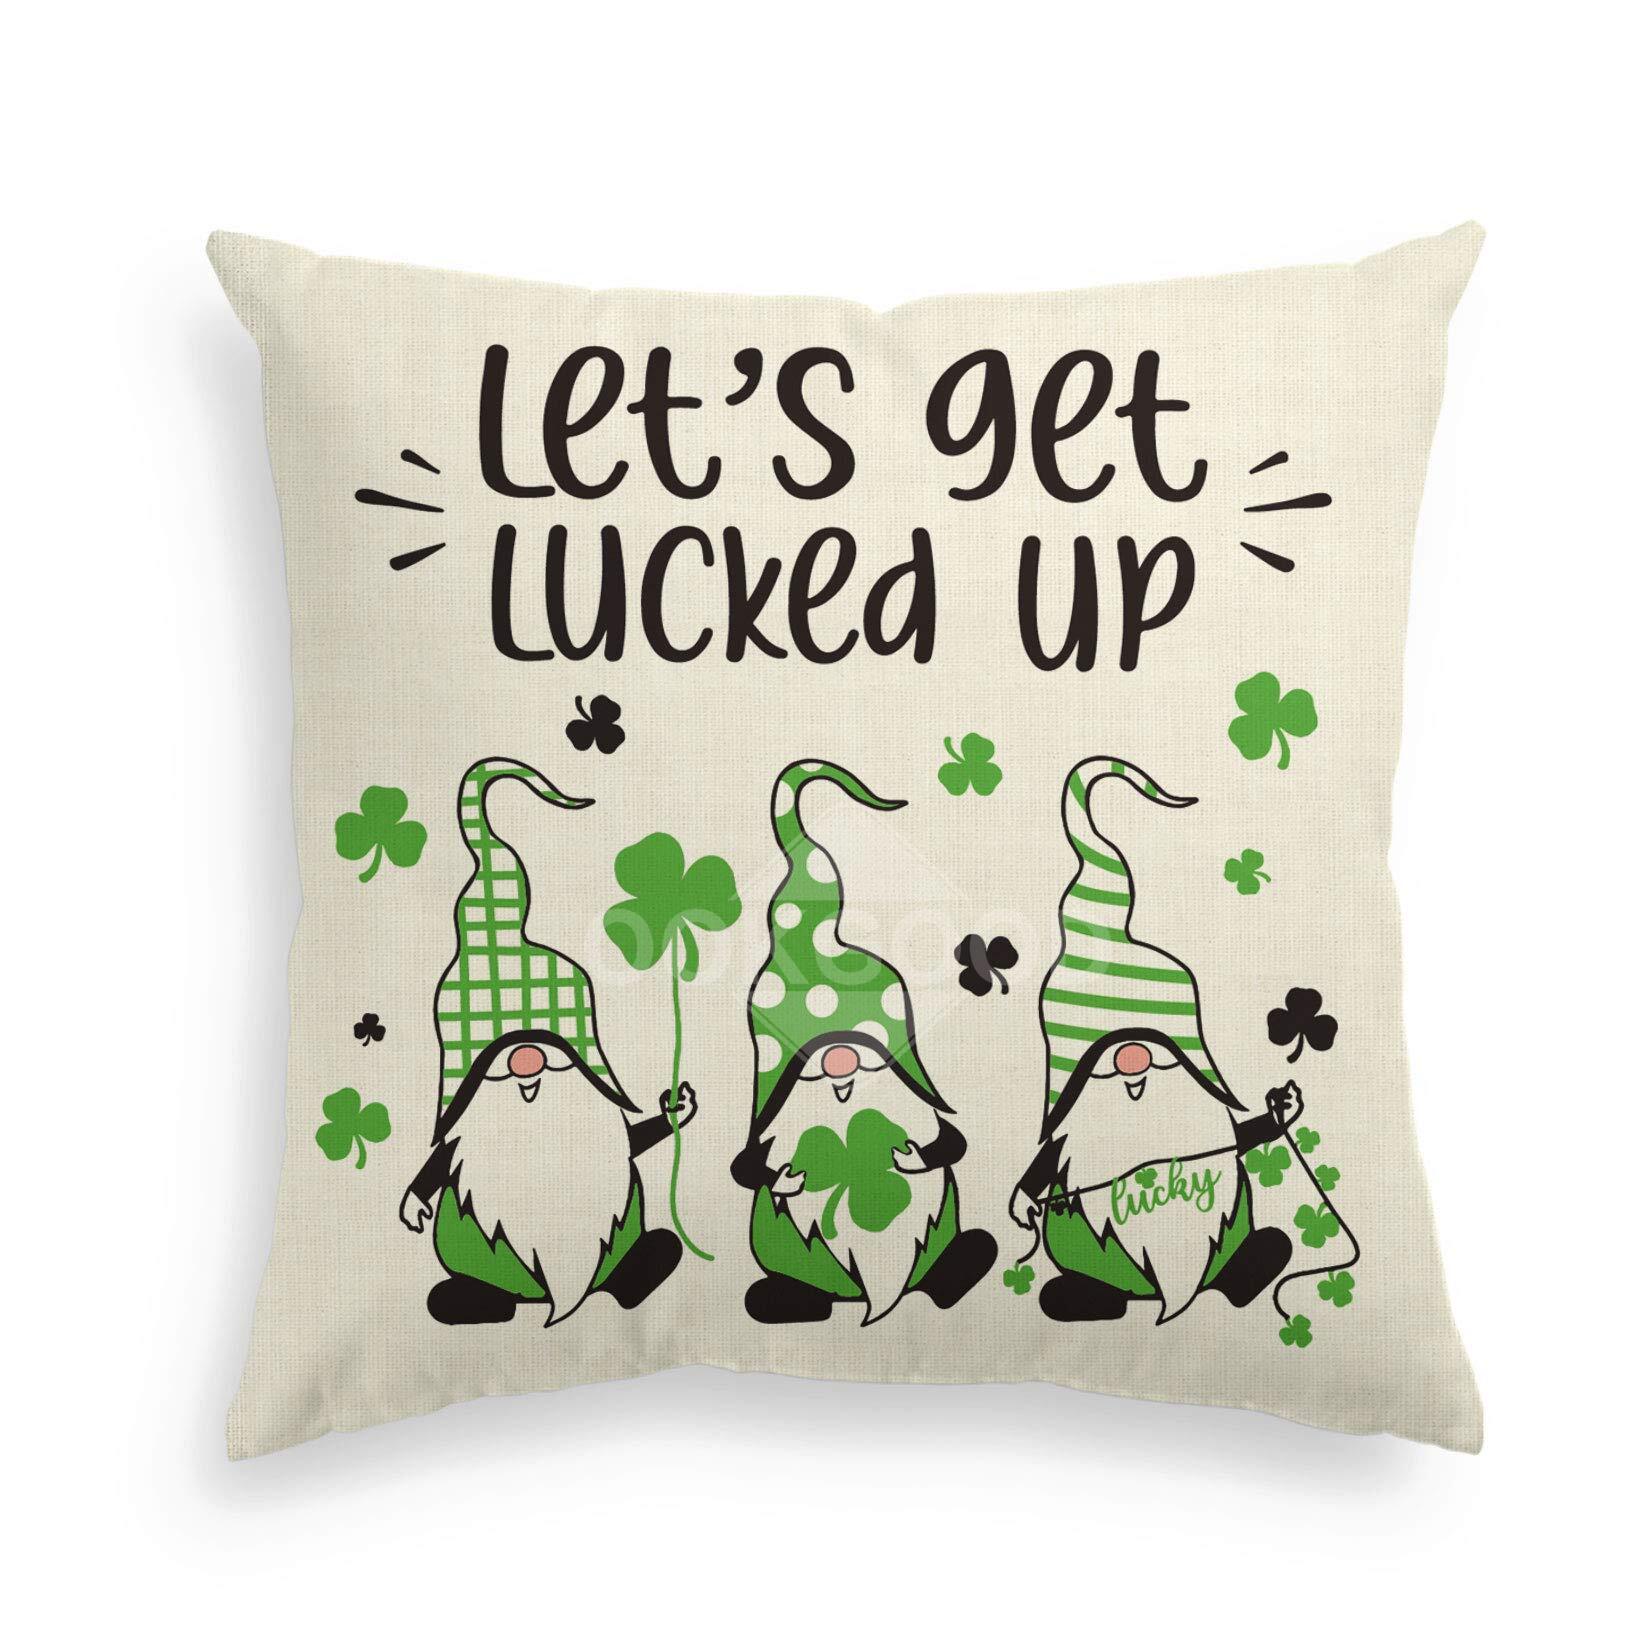 Let's Get Lucked Up - Adorable Gnome Pillowcase